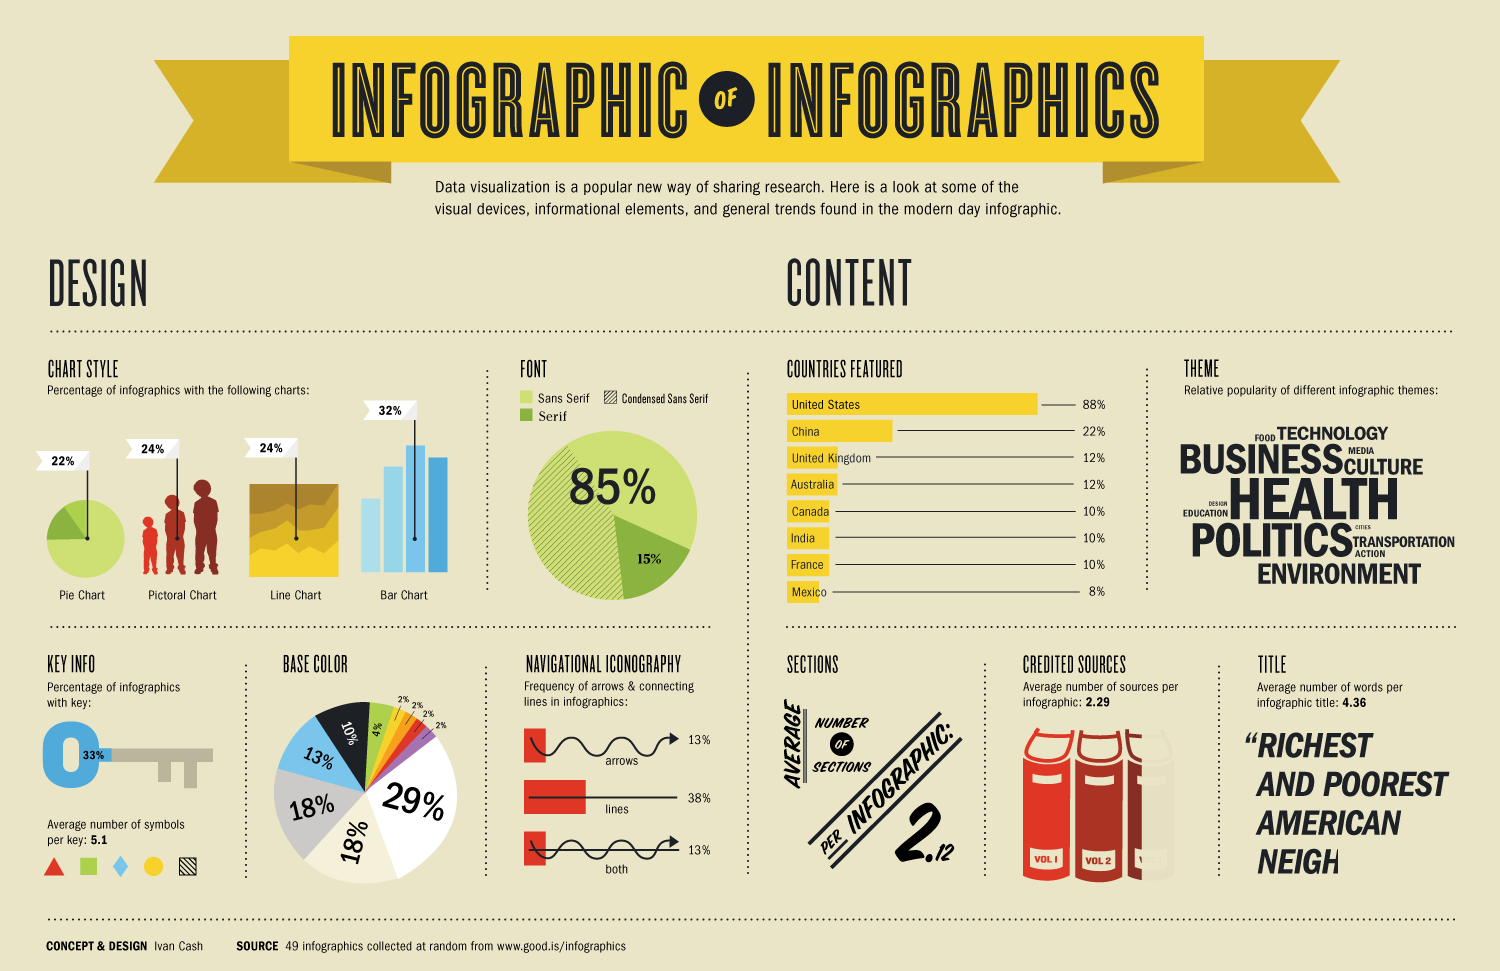 You Suck at Infographics